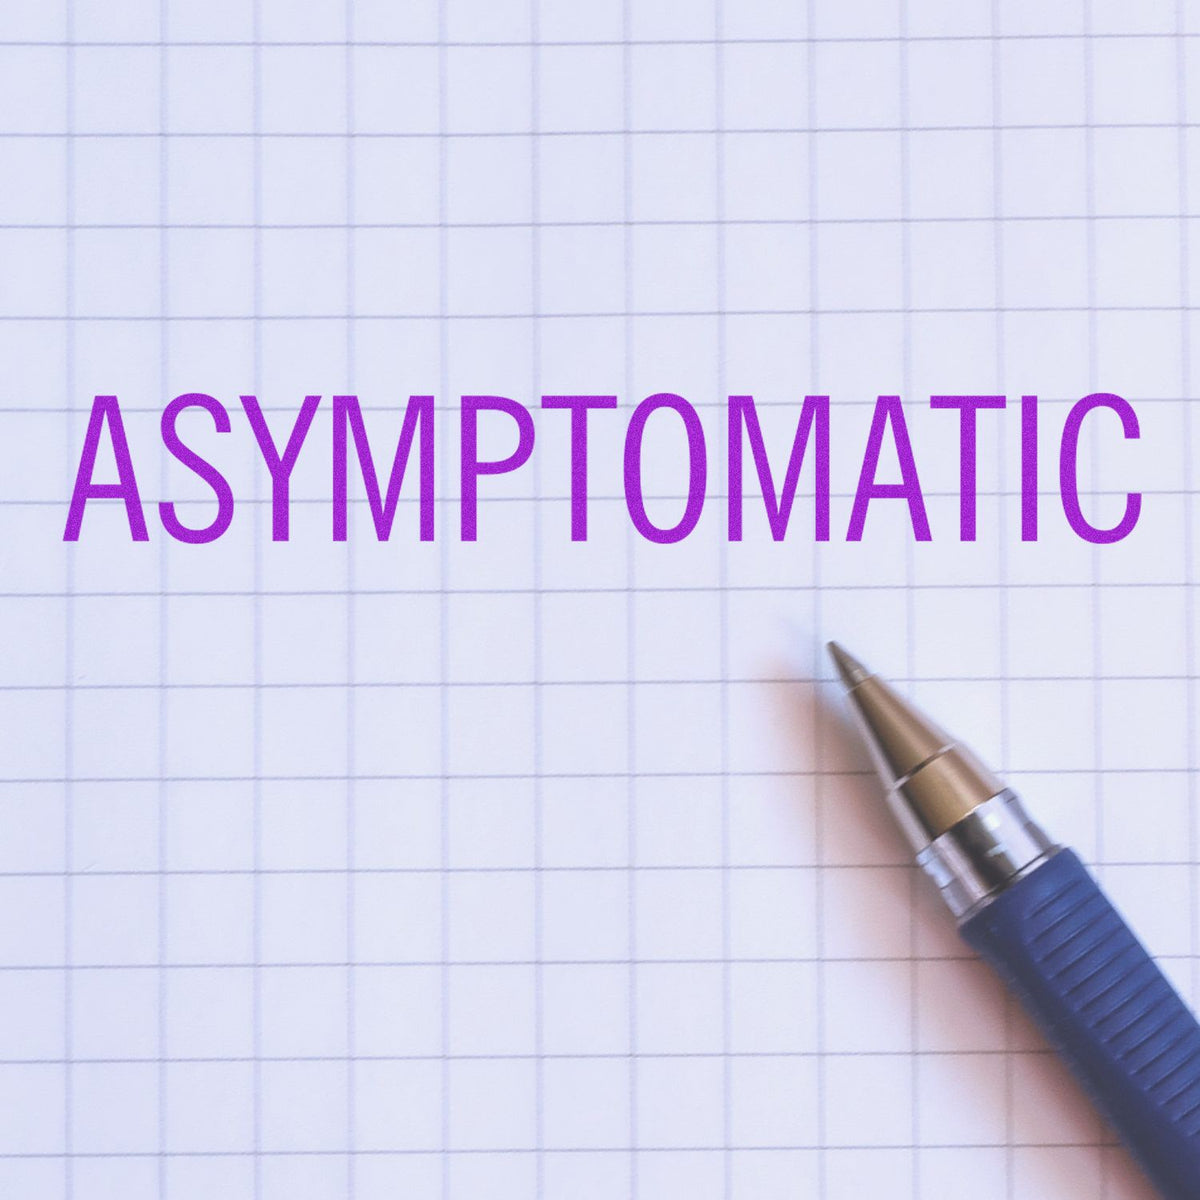 Large Pre-Inked Asymptomatic Stamp In Use